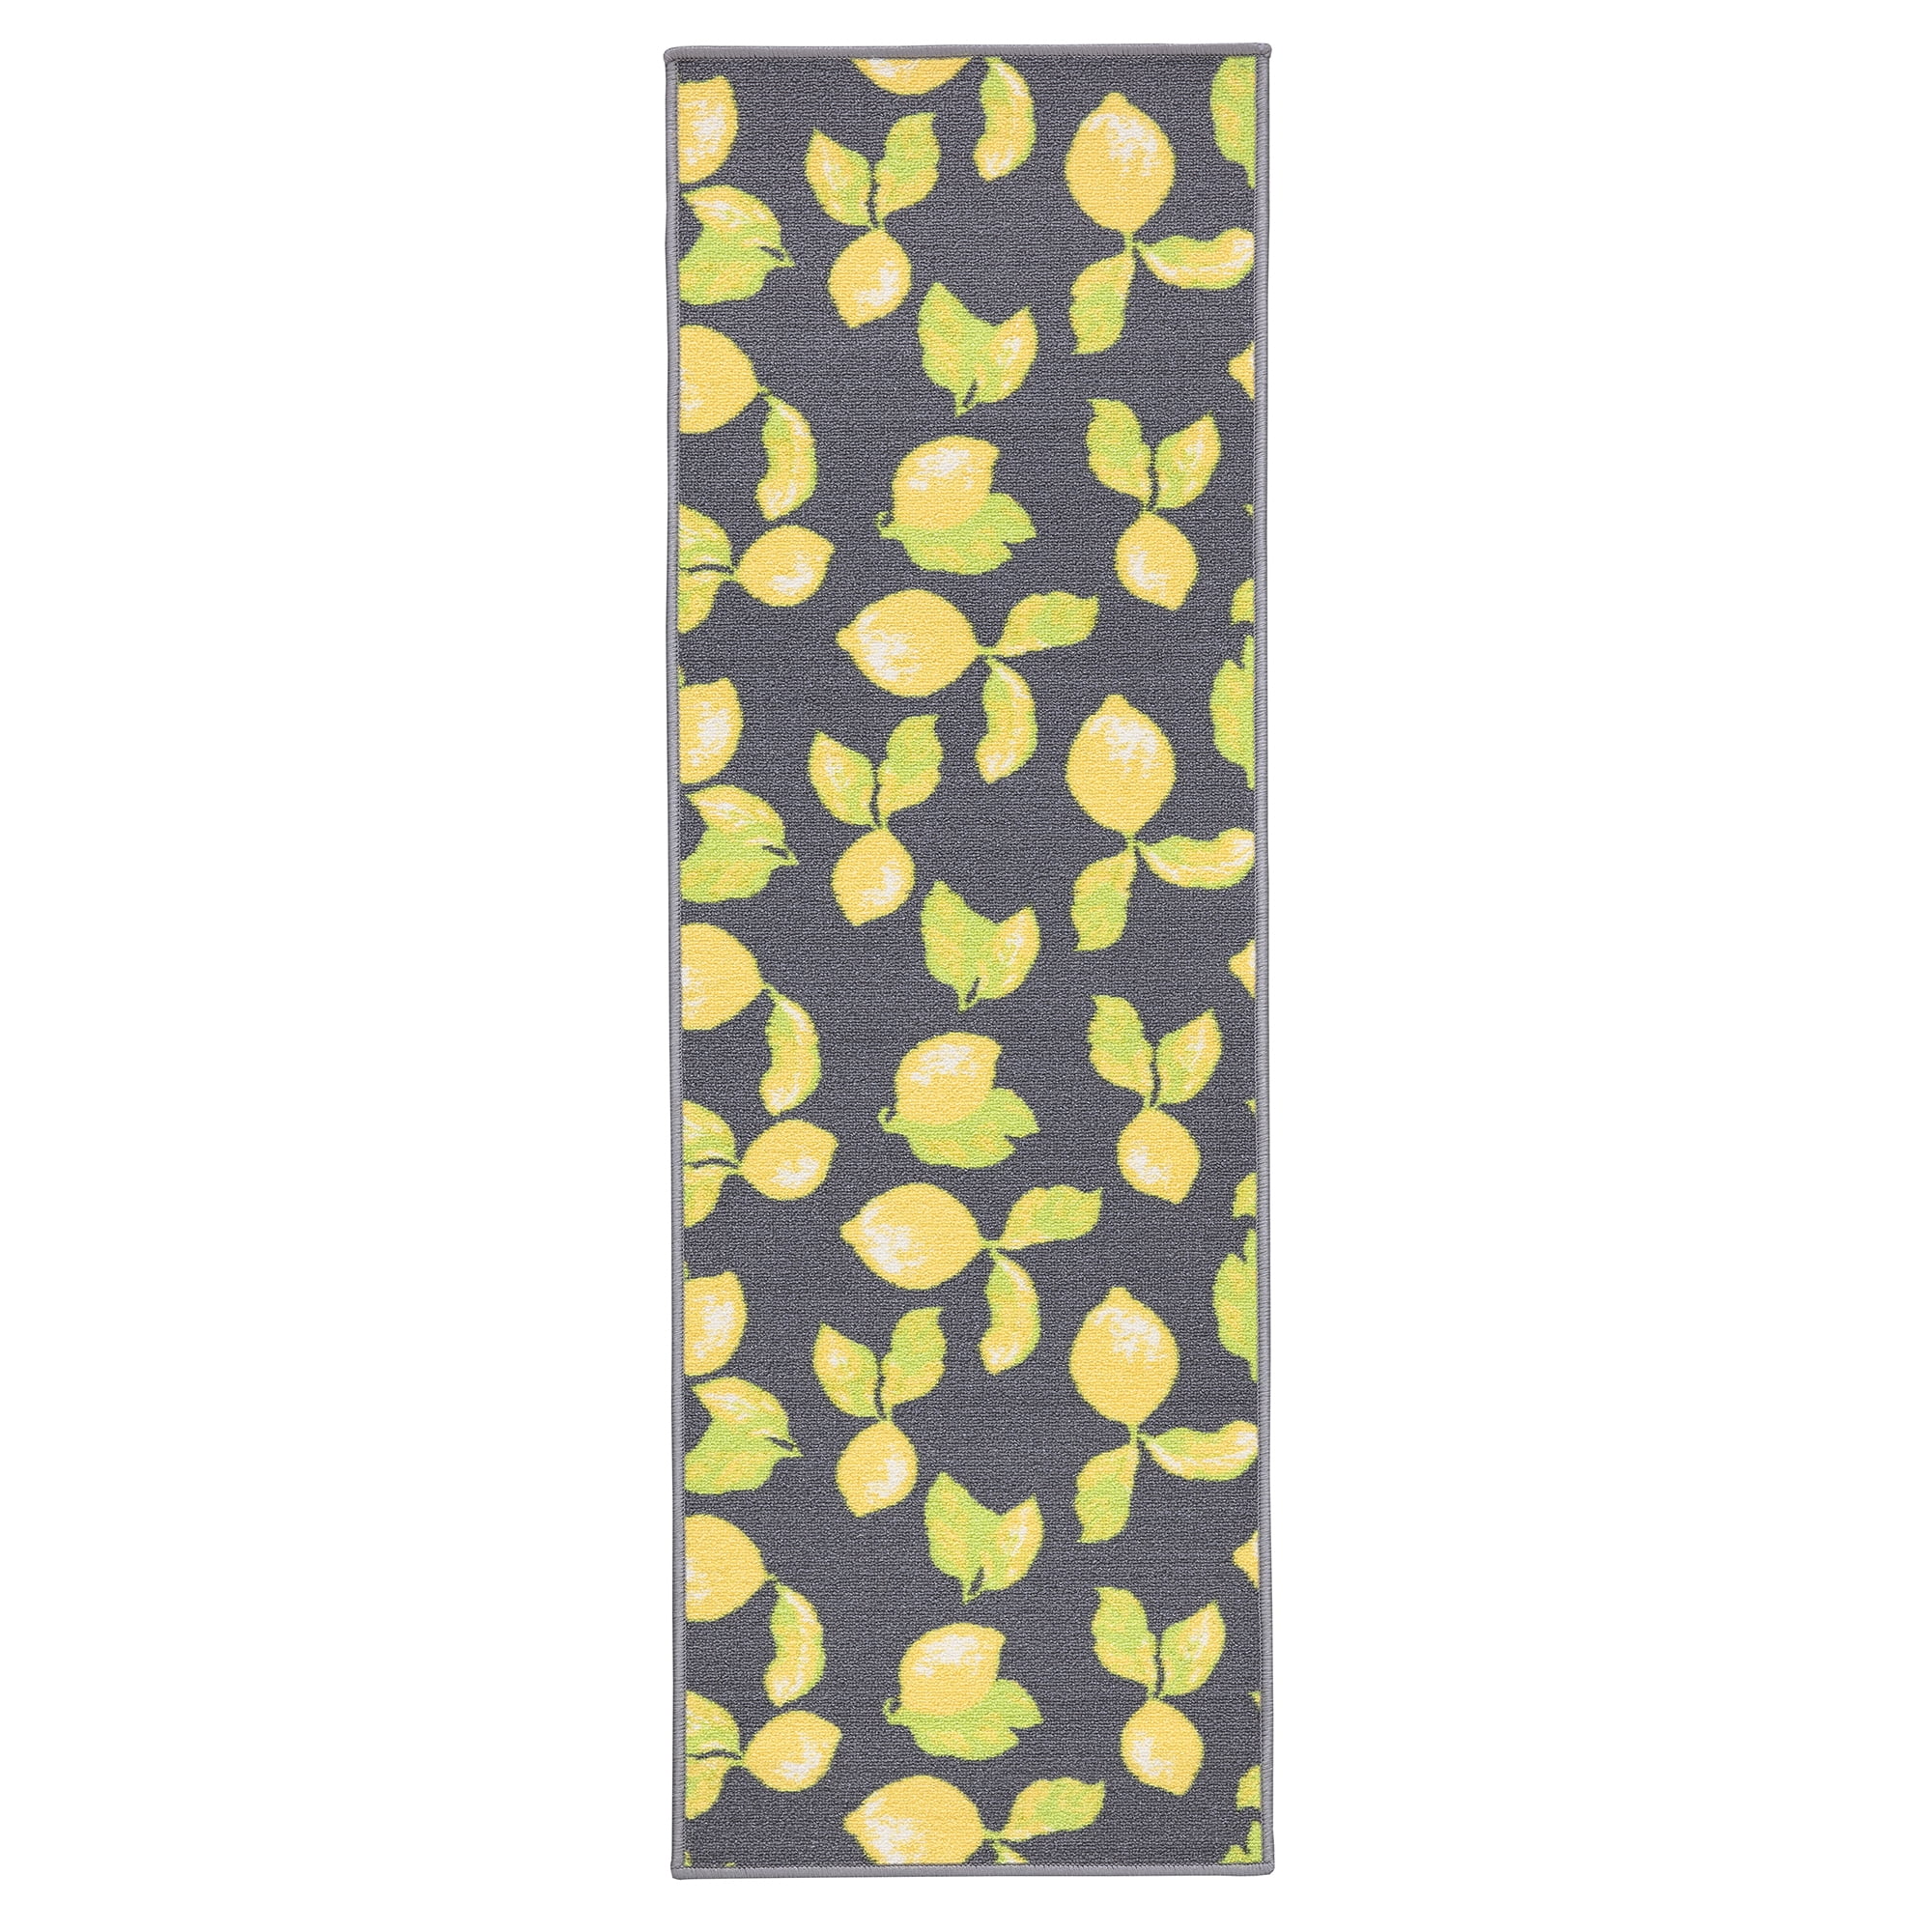 Set of Whole and Sliced Fresh Lemons with Leaves Pastel Color 3'2X5' Area Rug Dining Room Entryway Foyer Living Room Bedroom Study Children Playroom Crawl Rug on Slip Washable Floor Mats. 